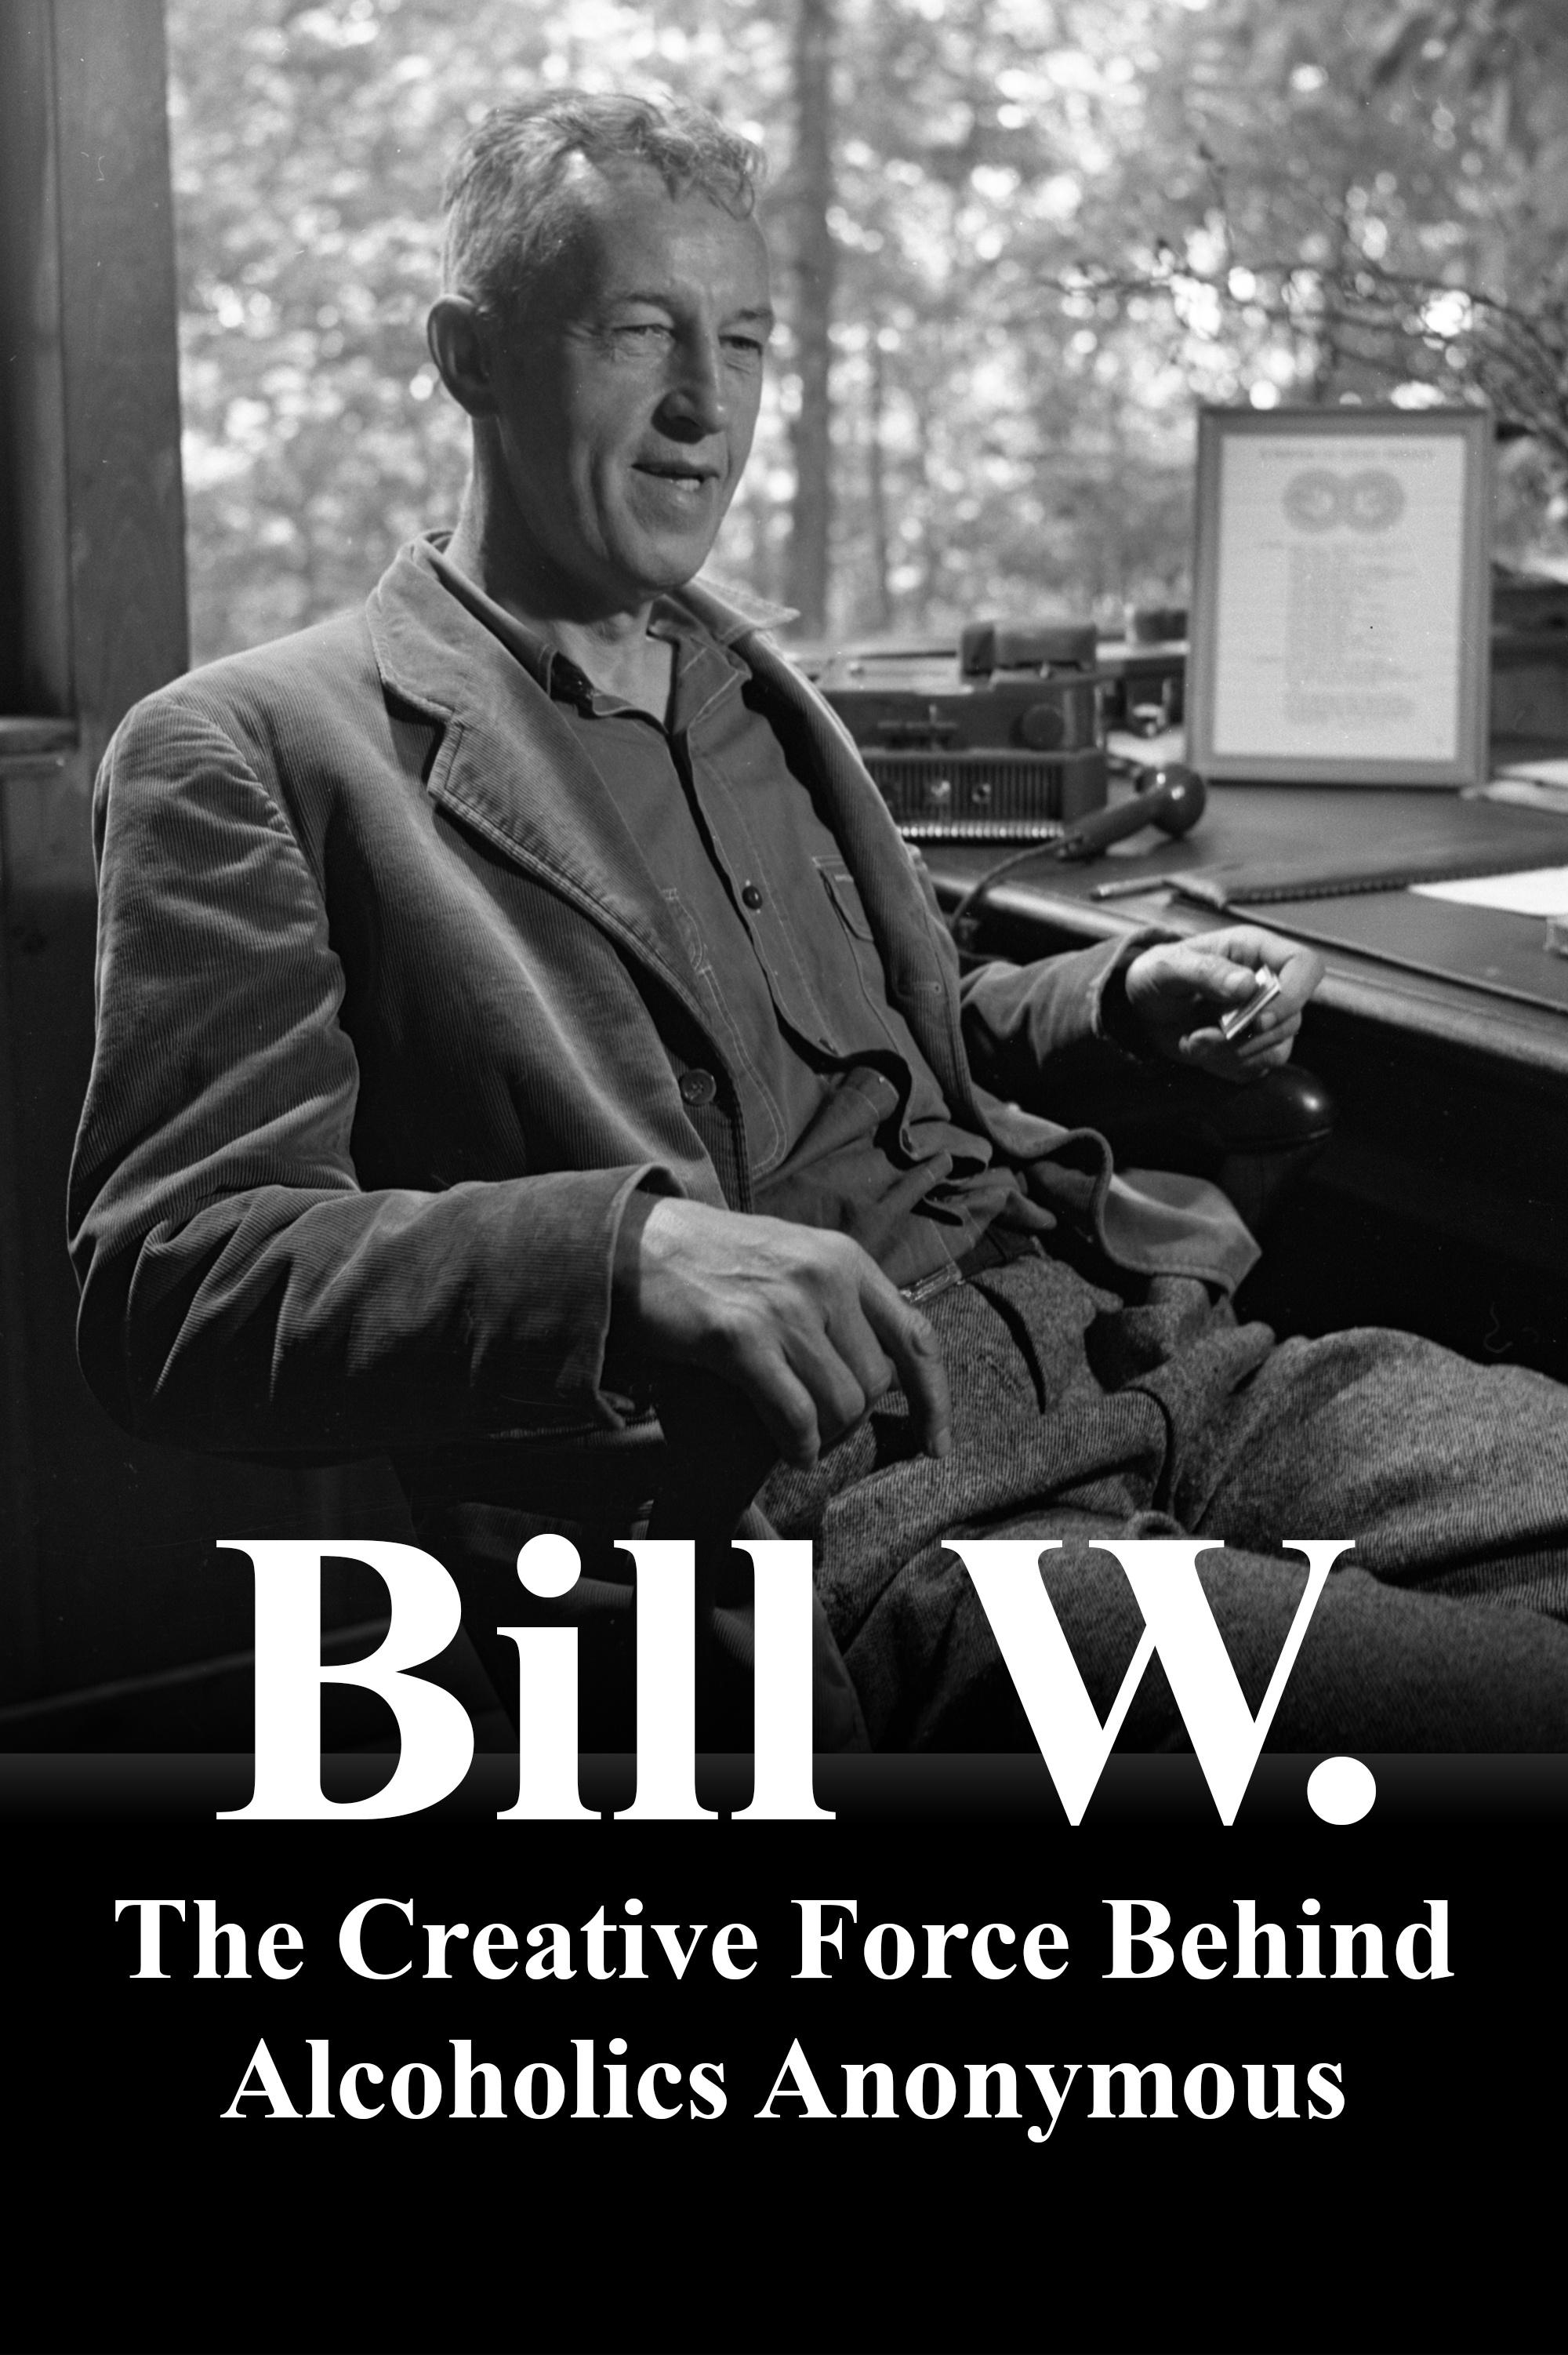 Bill W. The Creative Force Behind Alcoholics Anonymous